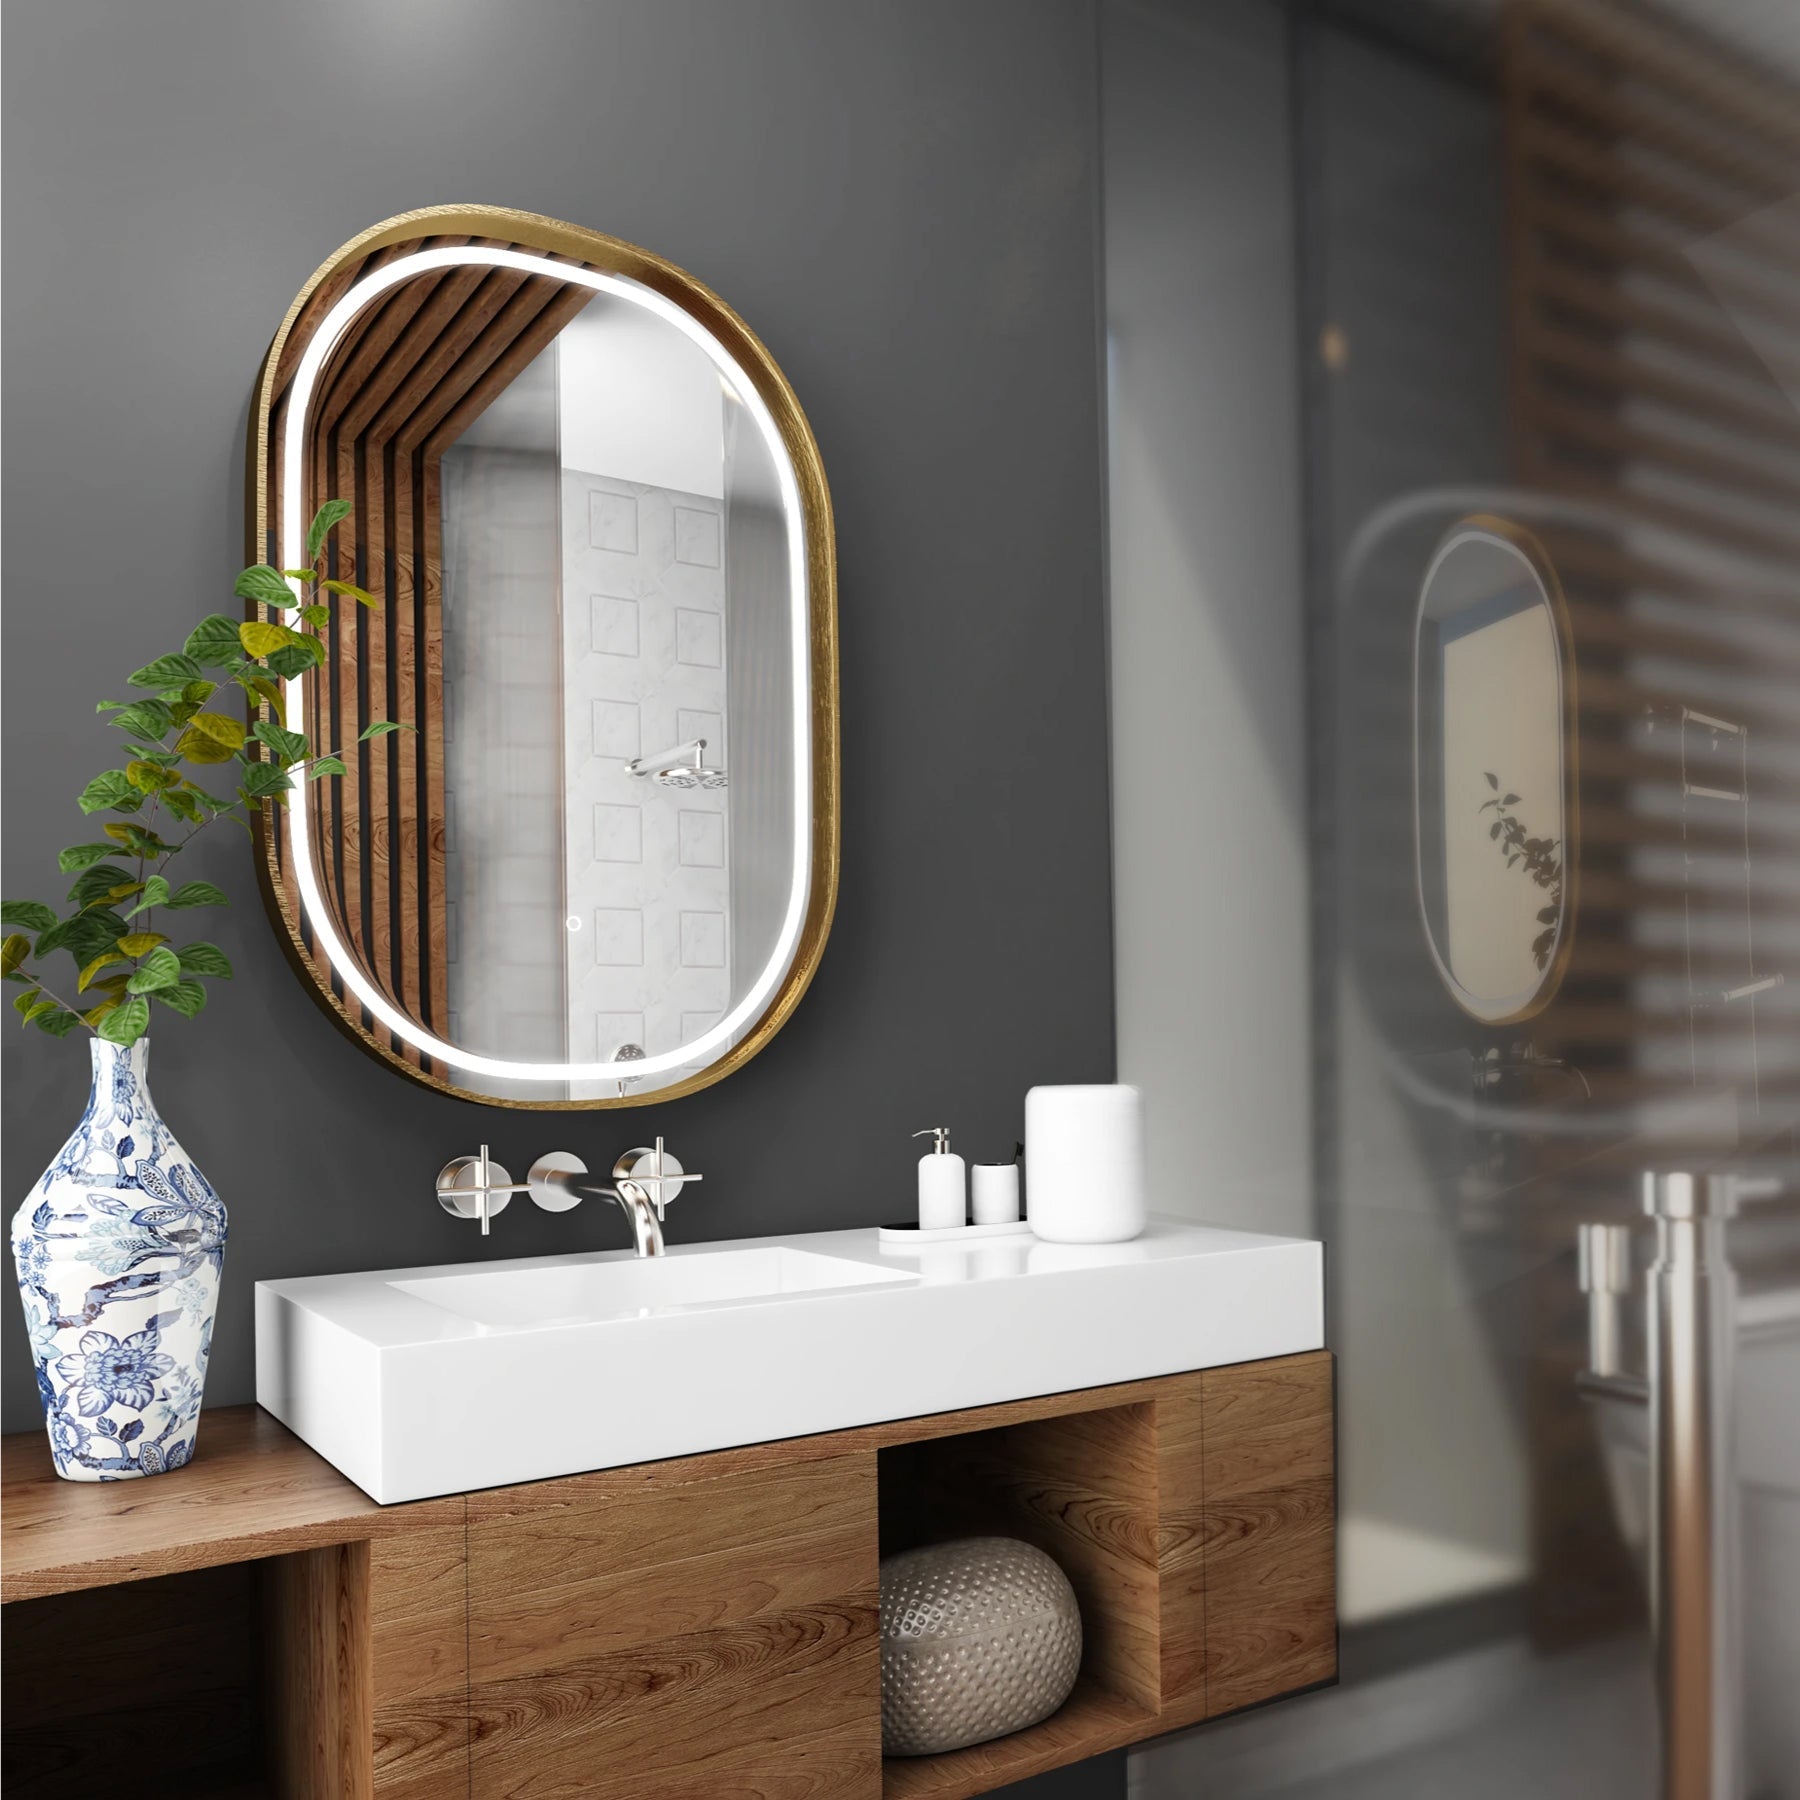 LED Bathroom Mirror with Lights Vanity Mirror for Bathroom with Double Lights Strip 3 Colors Anti-Fog Dimmable, 36*24